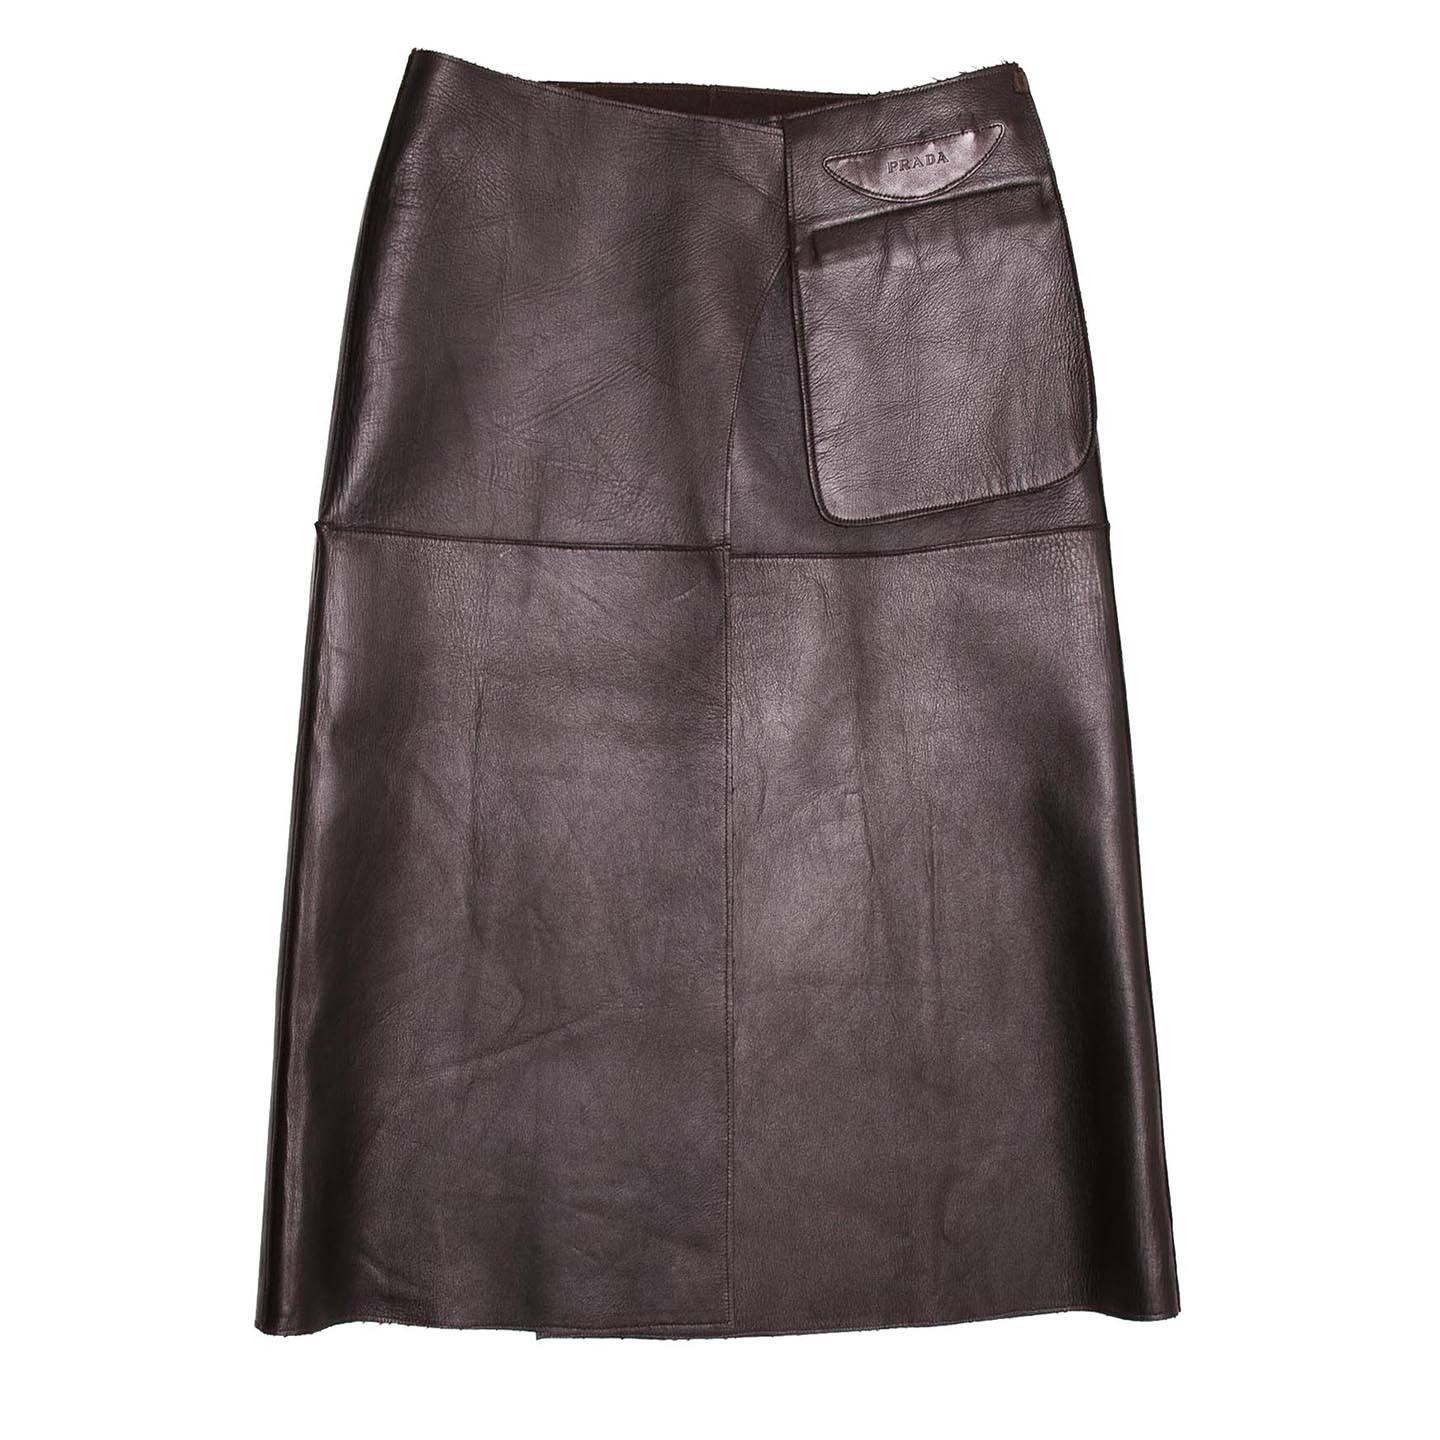 Dark brown leather reversible skirt with chocolate brown camel hair inside. It is a high waisted skirt with a wrap closure and a pouch pocket detail embellished by a Prada logo on the leather side.

Size  44 Italian sizing

Condition  Excellent: